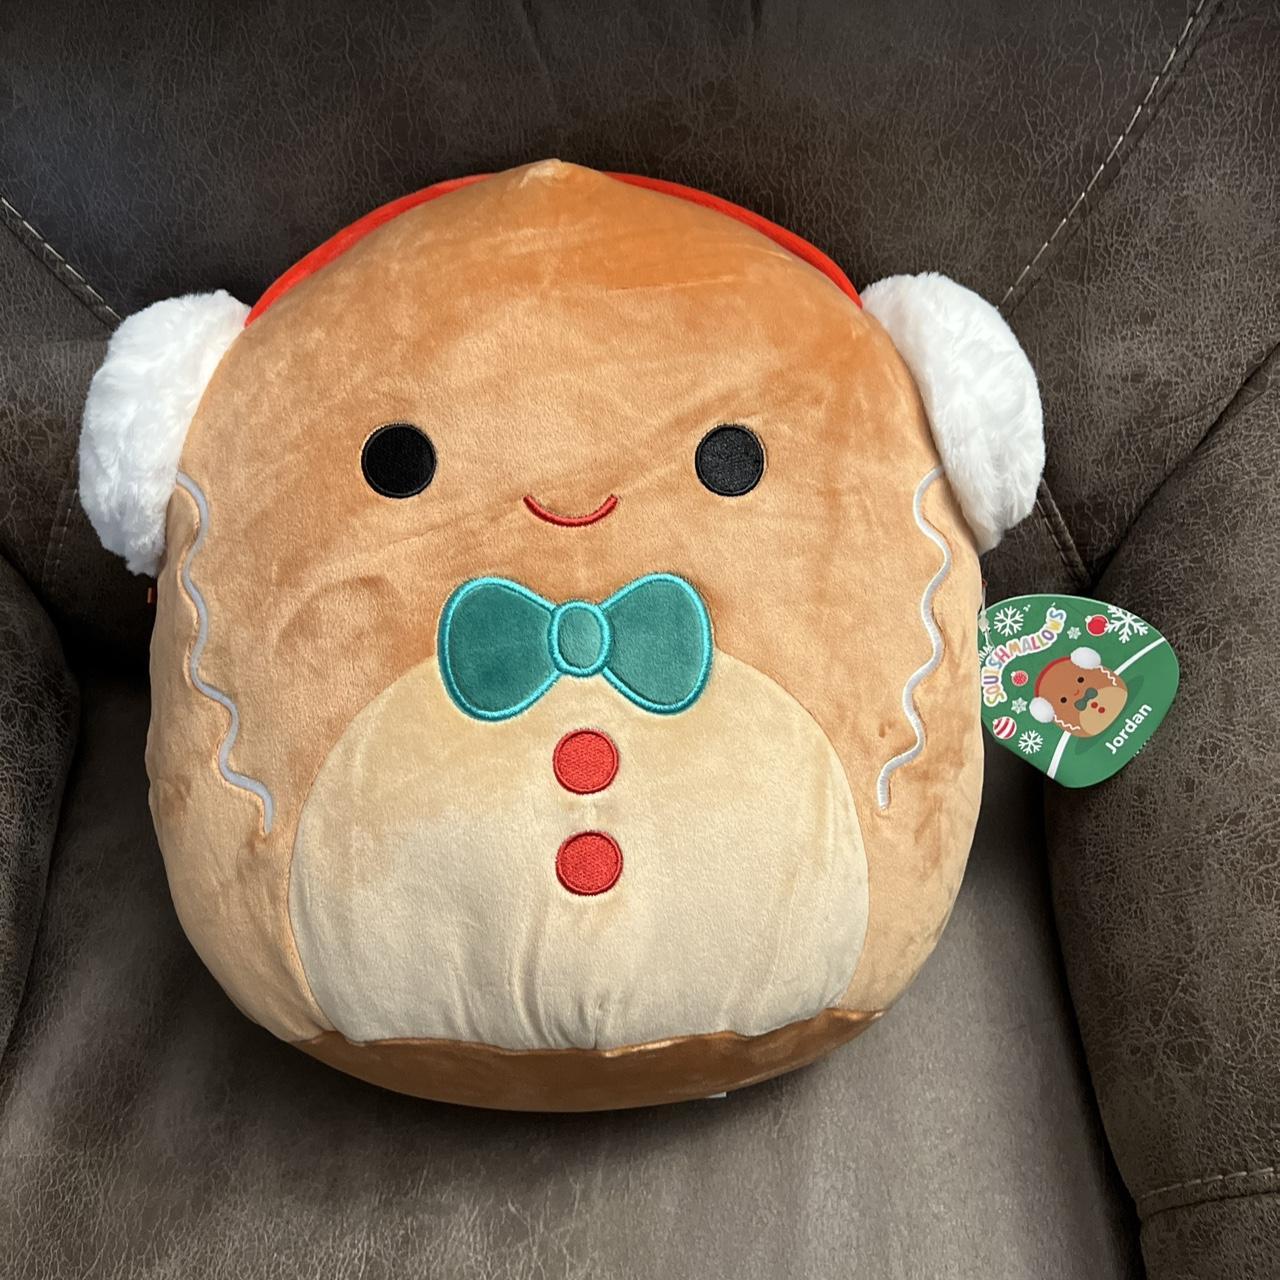 Squishmallow 12 Inch Jordan the Gingerbread with - Depop